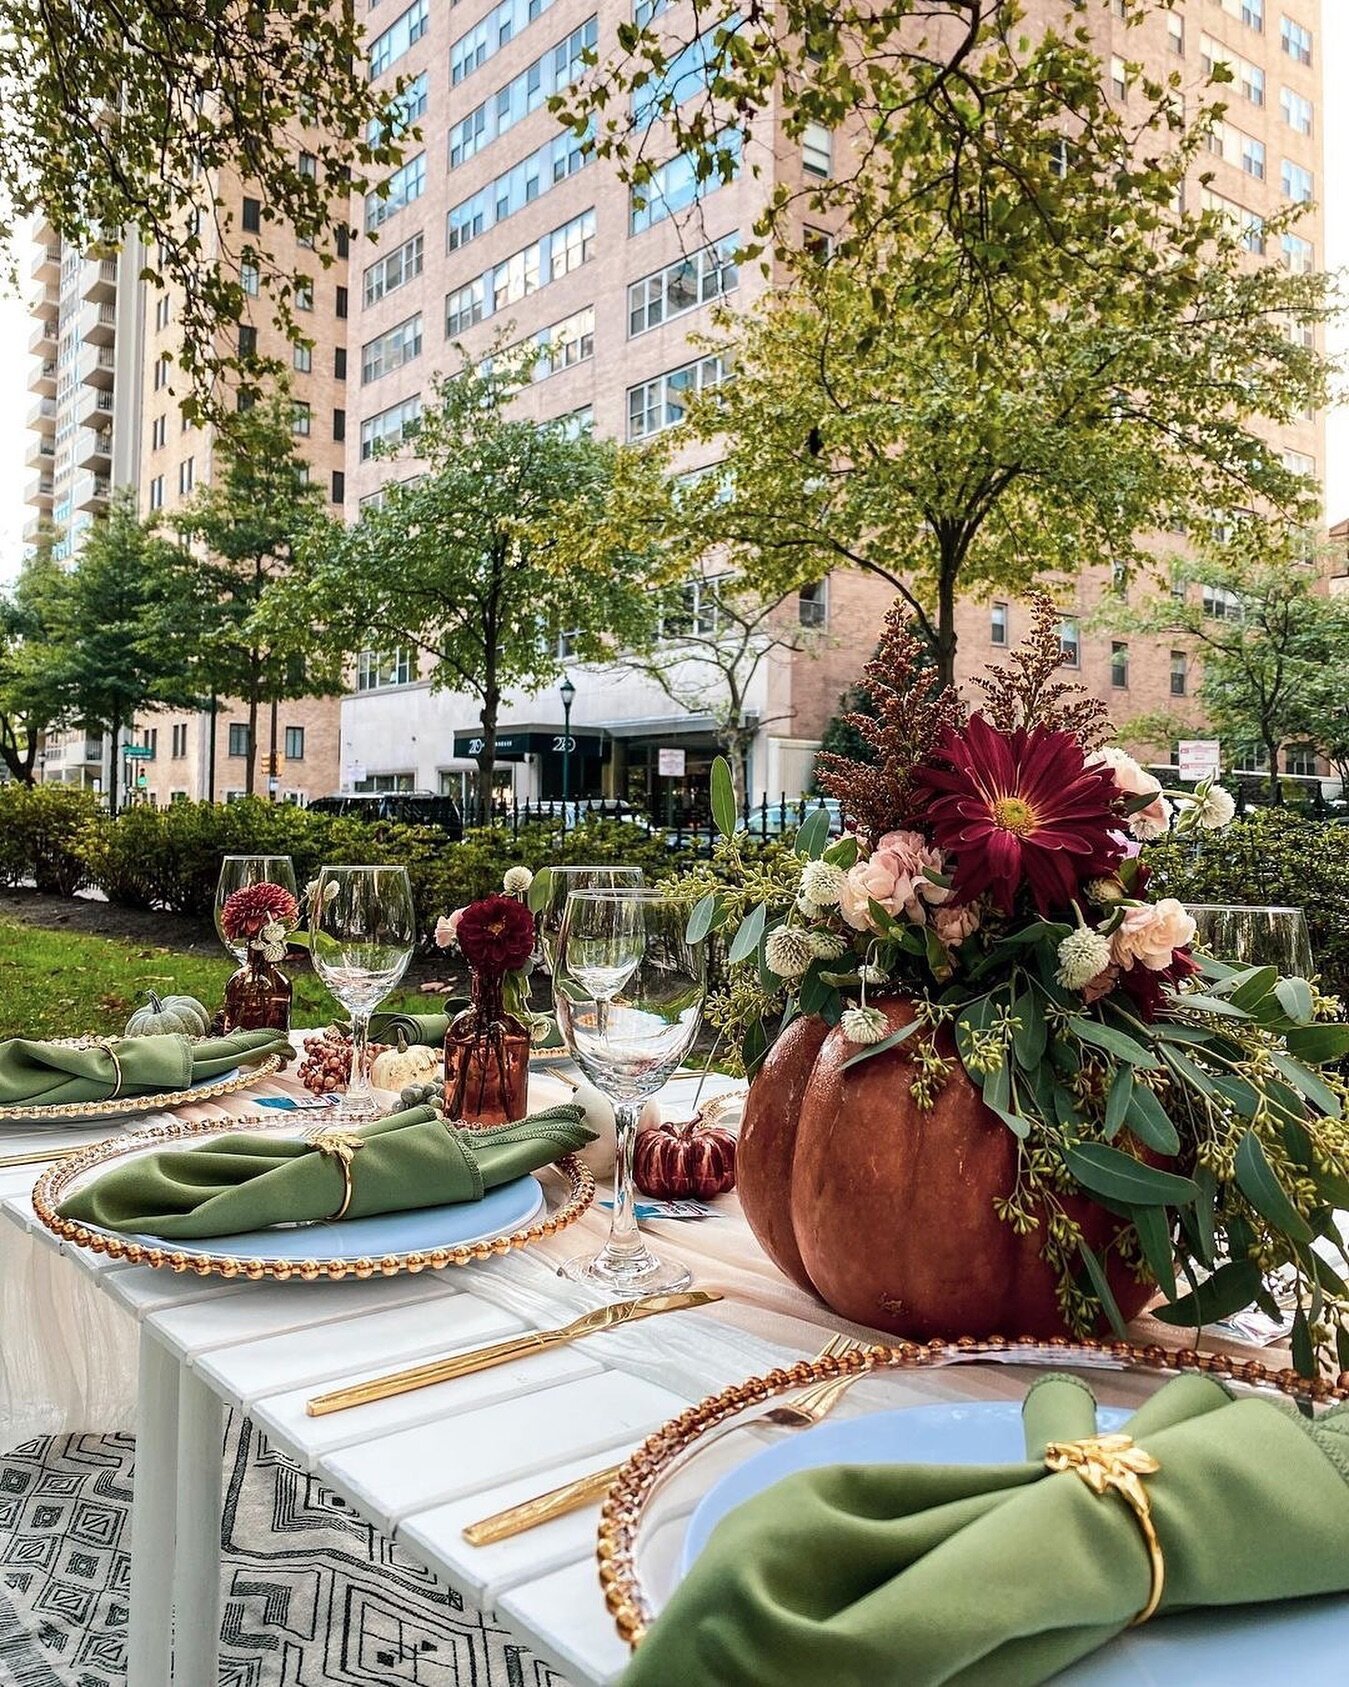 Embracing the last few days of outdoor picnics this Fall 🍂✨ before Winter's chill sets in. Let's savor every moment surrounded by nature's beauty &amp; delicious bites. 🥰

Friendly reminder that we also offer cozy indoor picnics to keep the spirit 